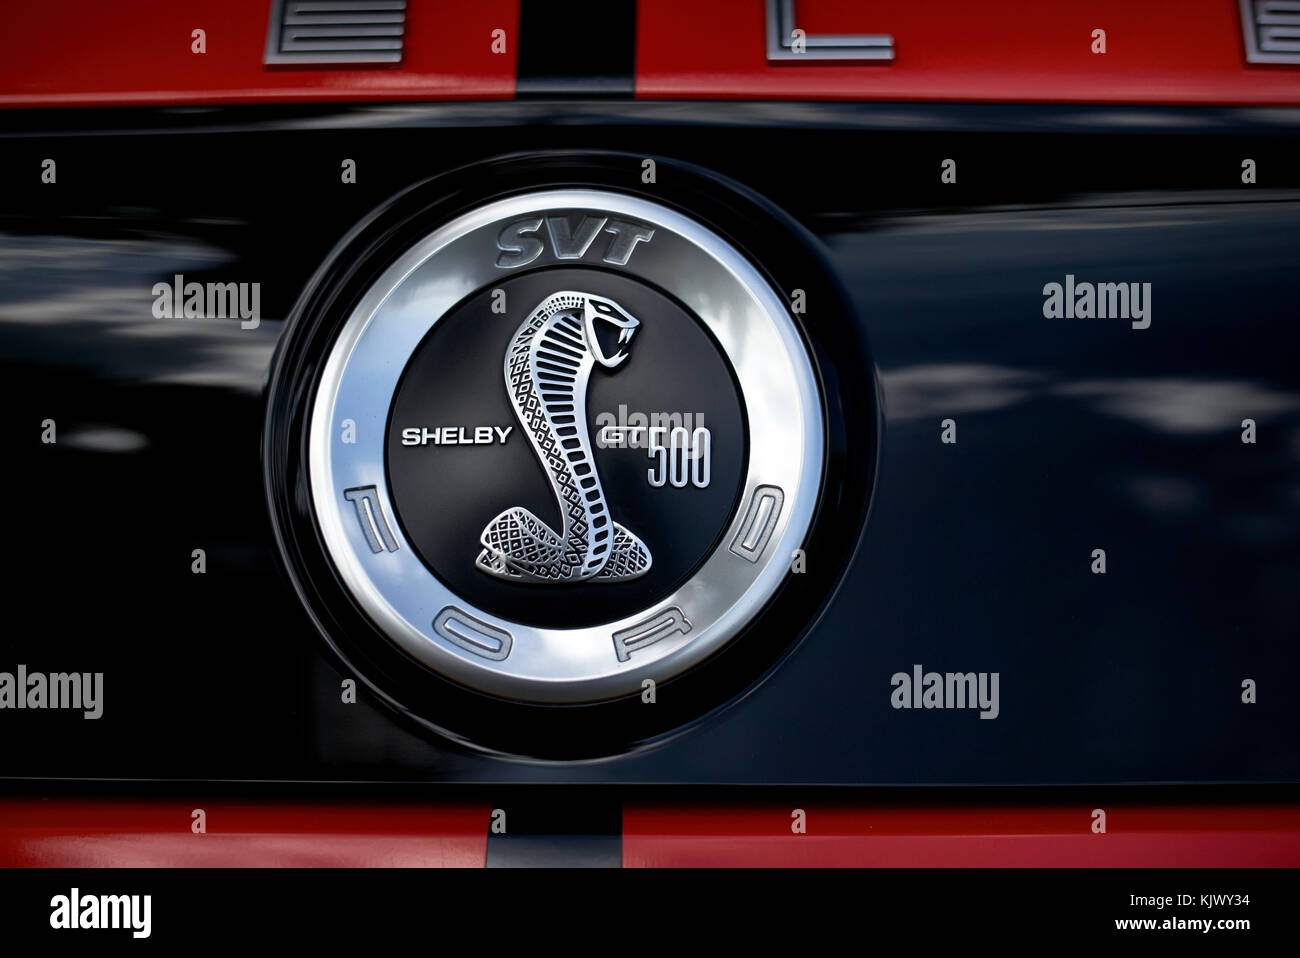 Badge and iconic insignia detail of a Ford Mustang Shelby GT500 American muscle car. Stock Photo